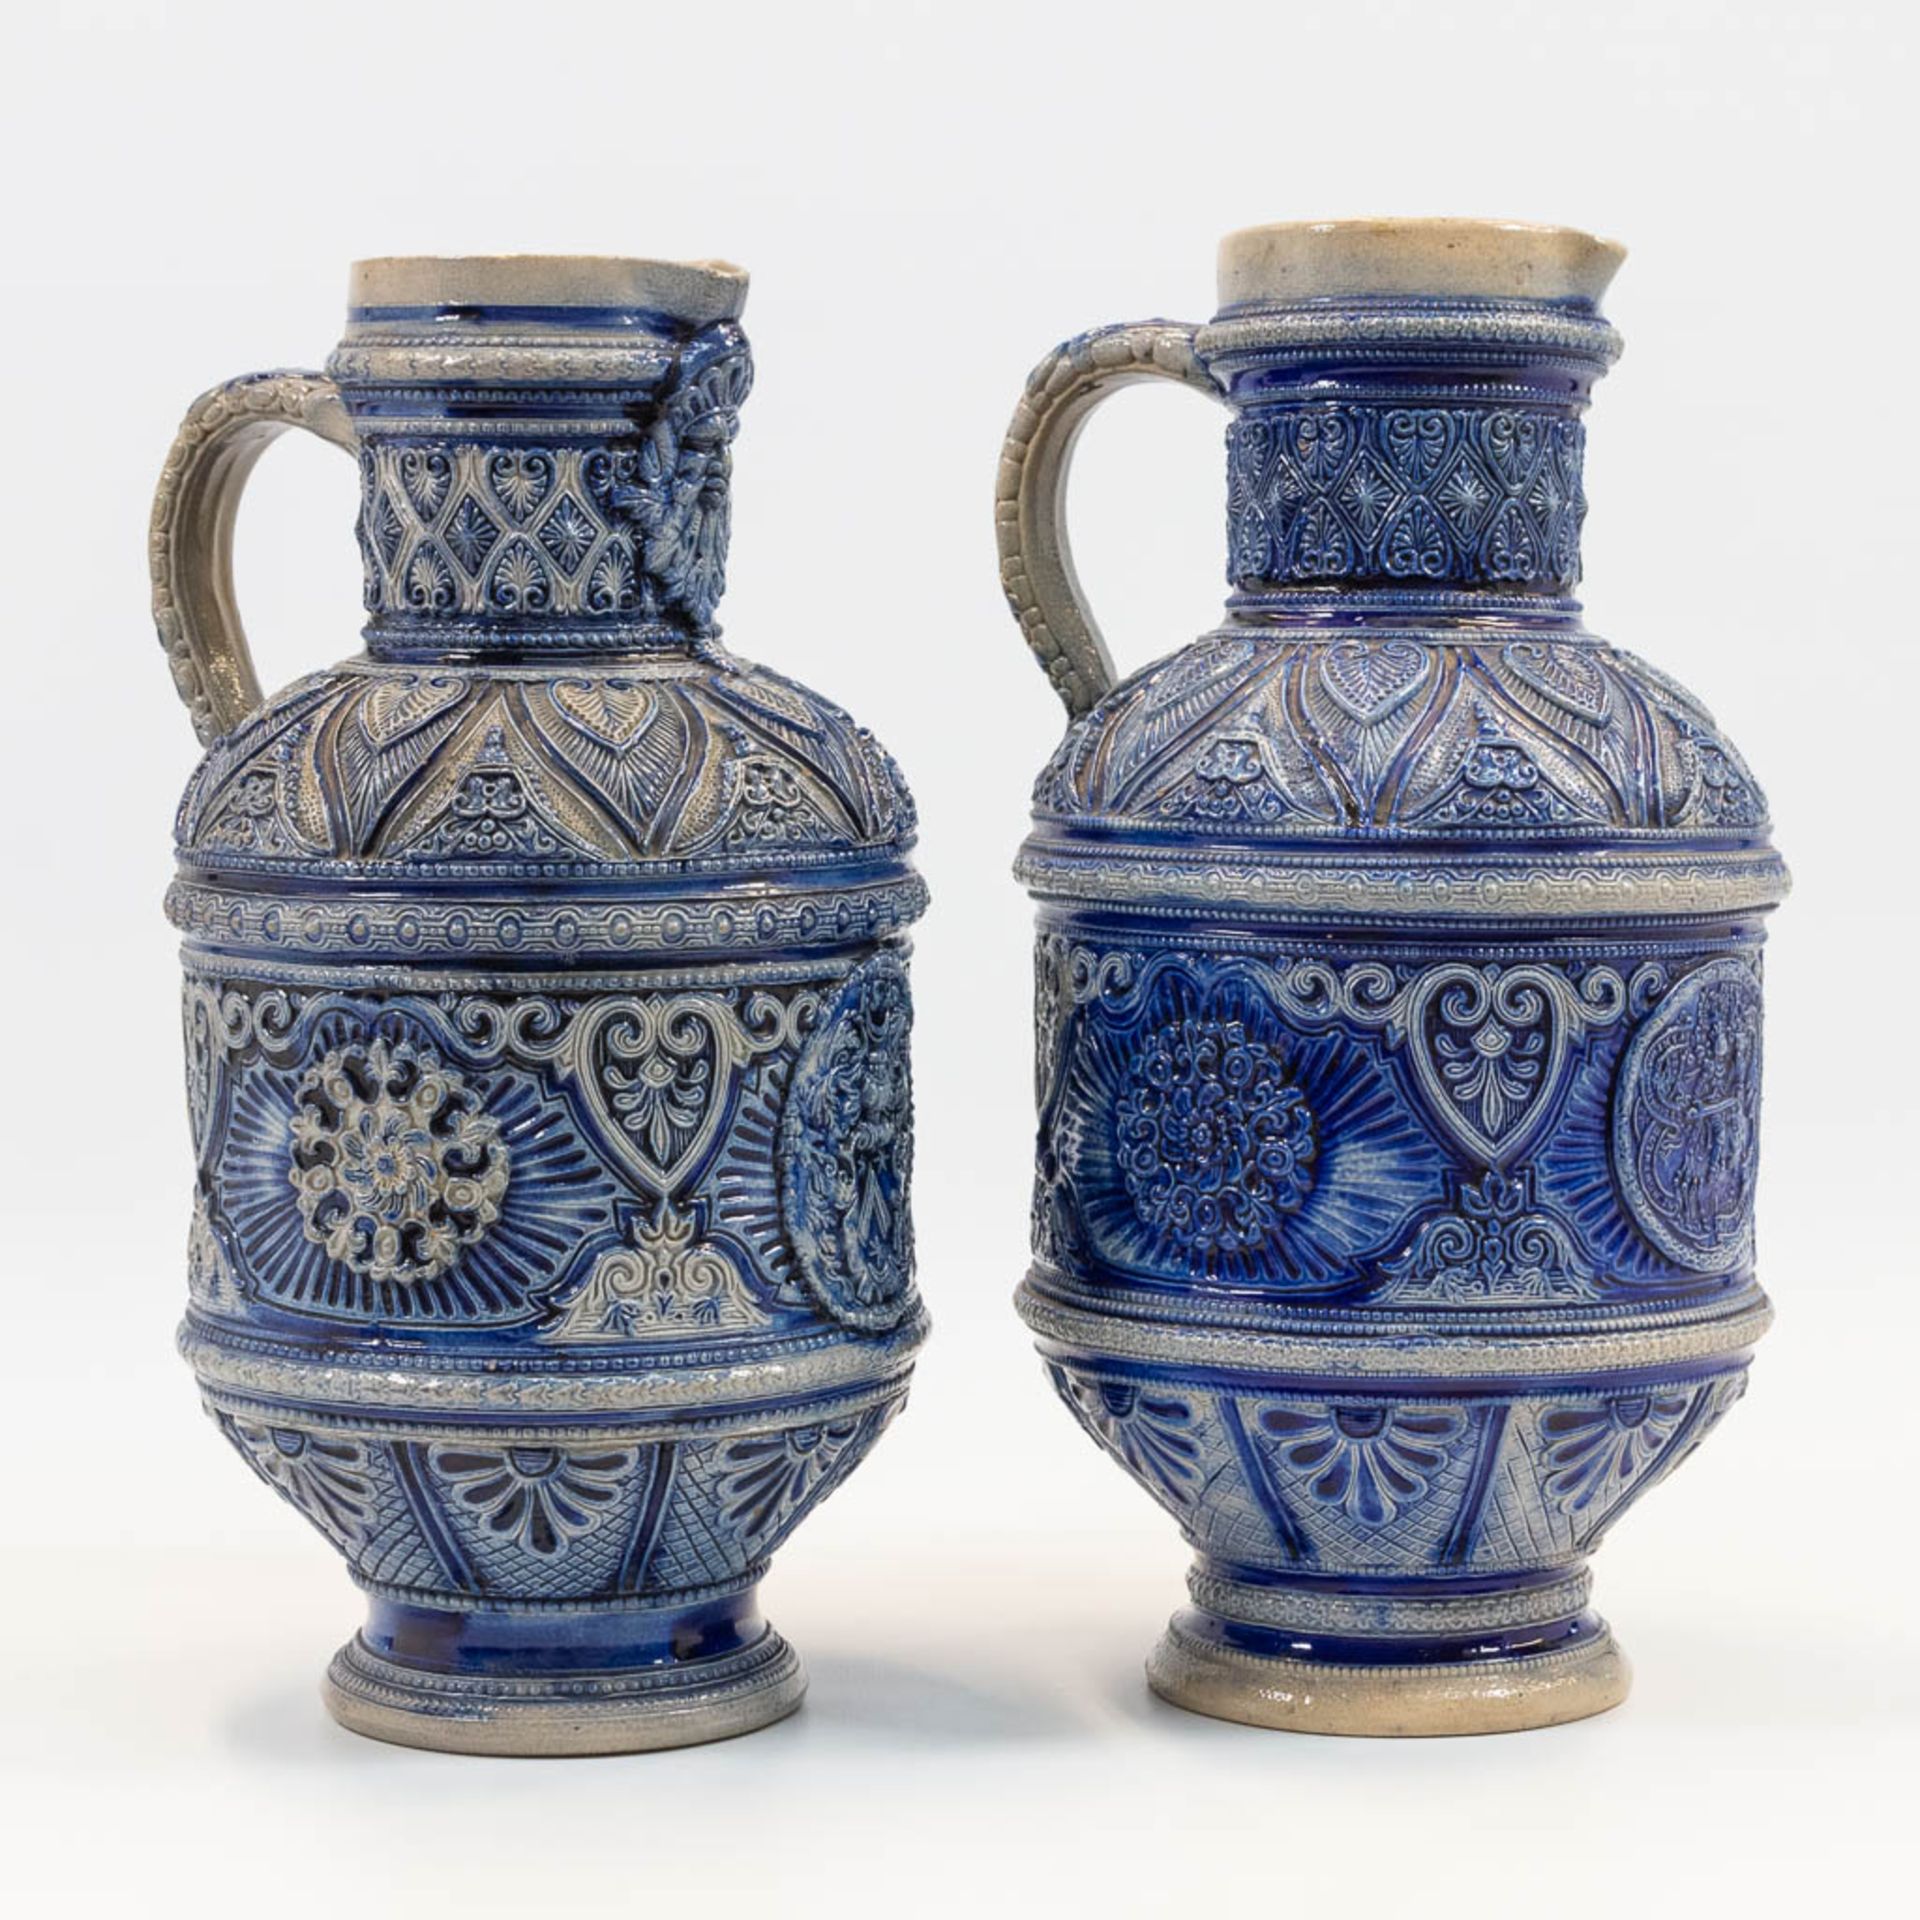 A collection of 2 Westerwald Pitchers with blue glaze, of which one has a Bartmann. (32 x 18 cm) - Image 5 of 14